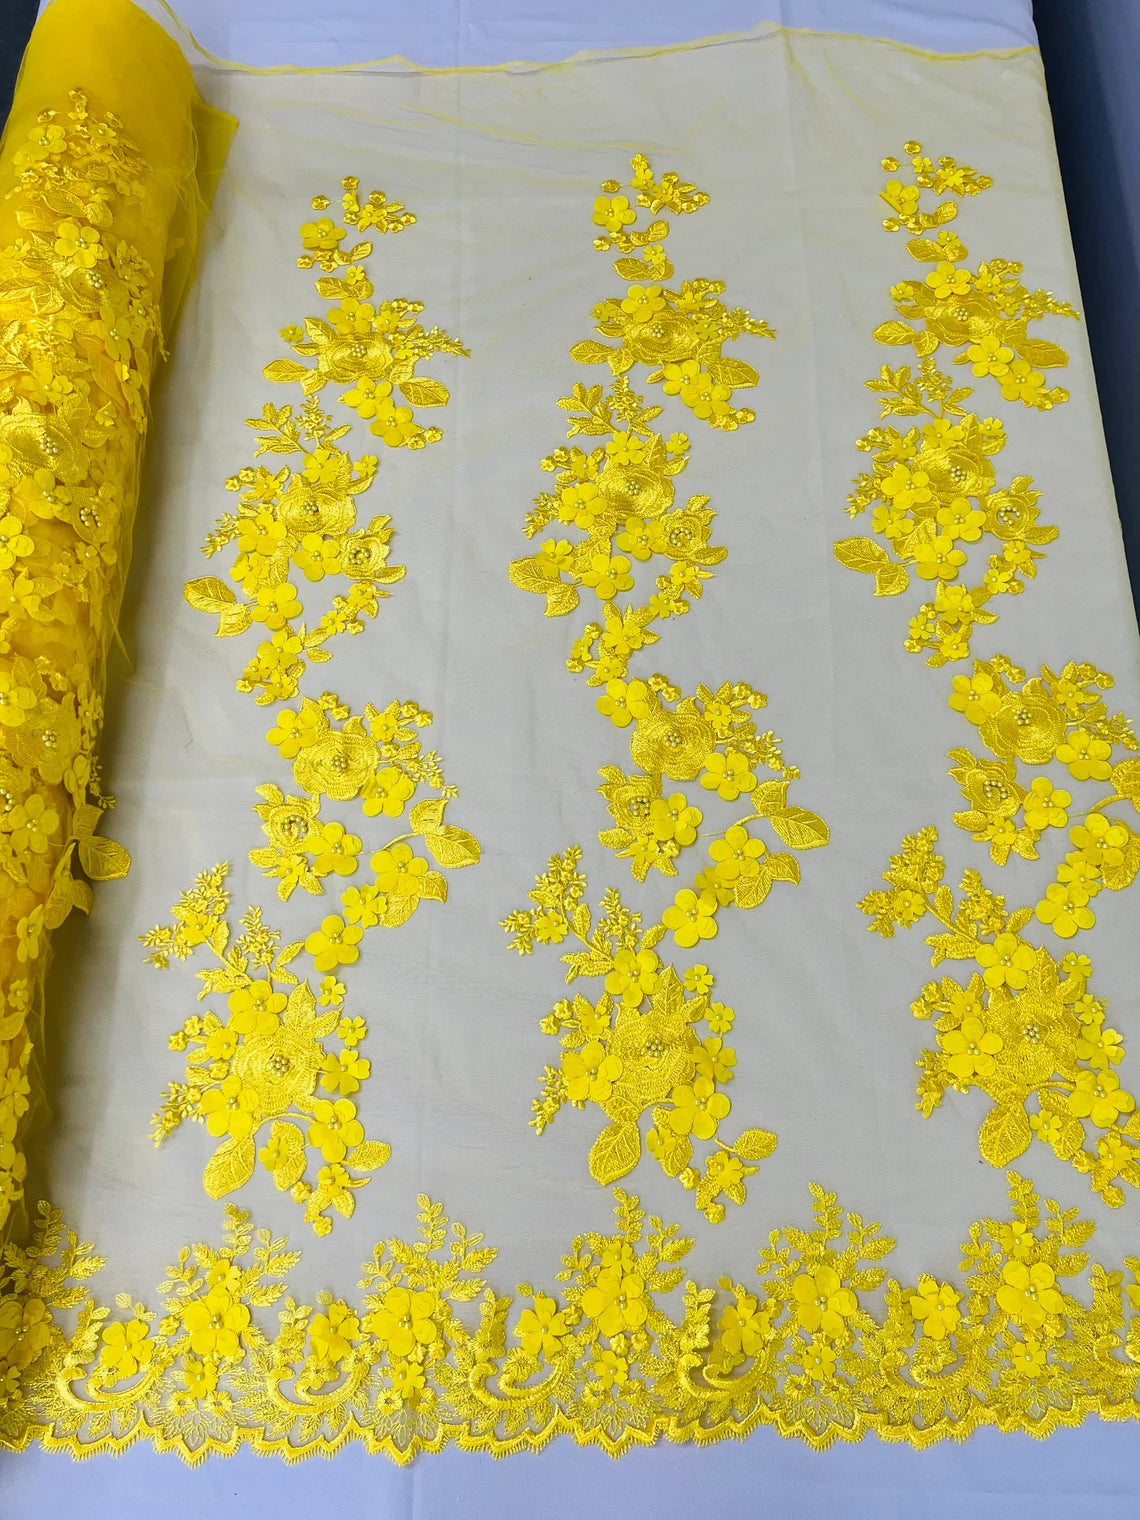 3D Flower Panels Fabric - Yellow - Flower Panels Bead Embroidered on Lace Fabric Sold By Yard